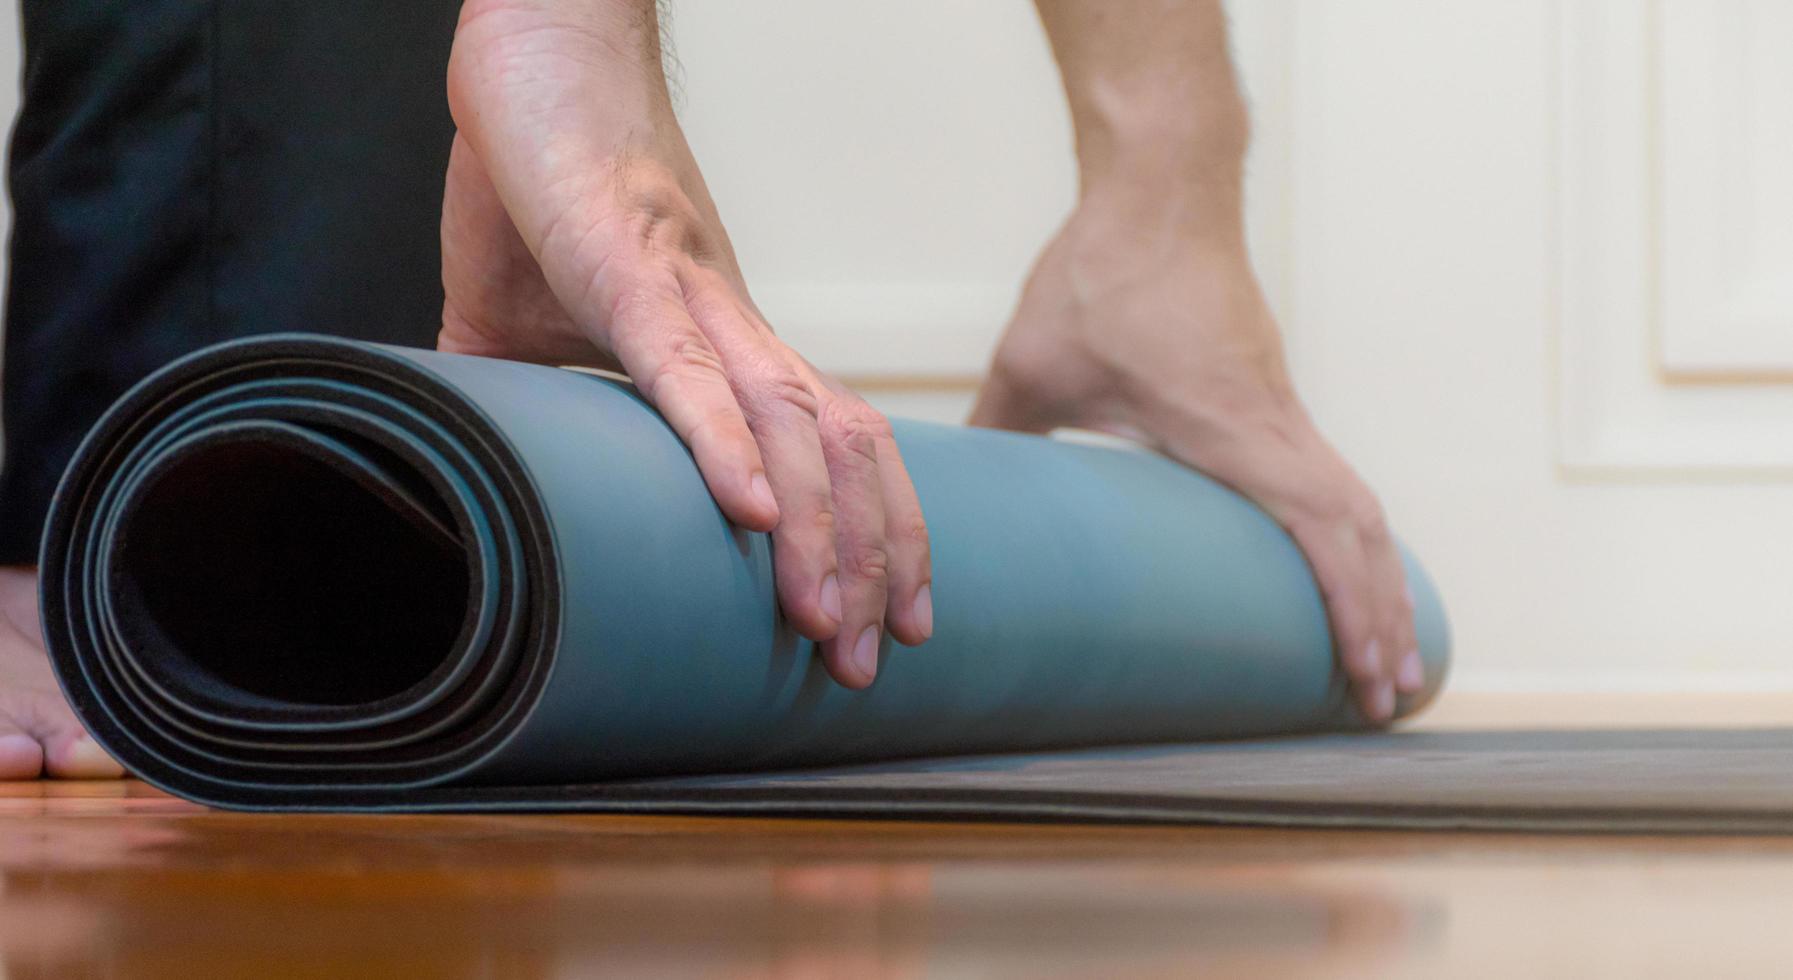 The man is using his hands to roll green yoga photo